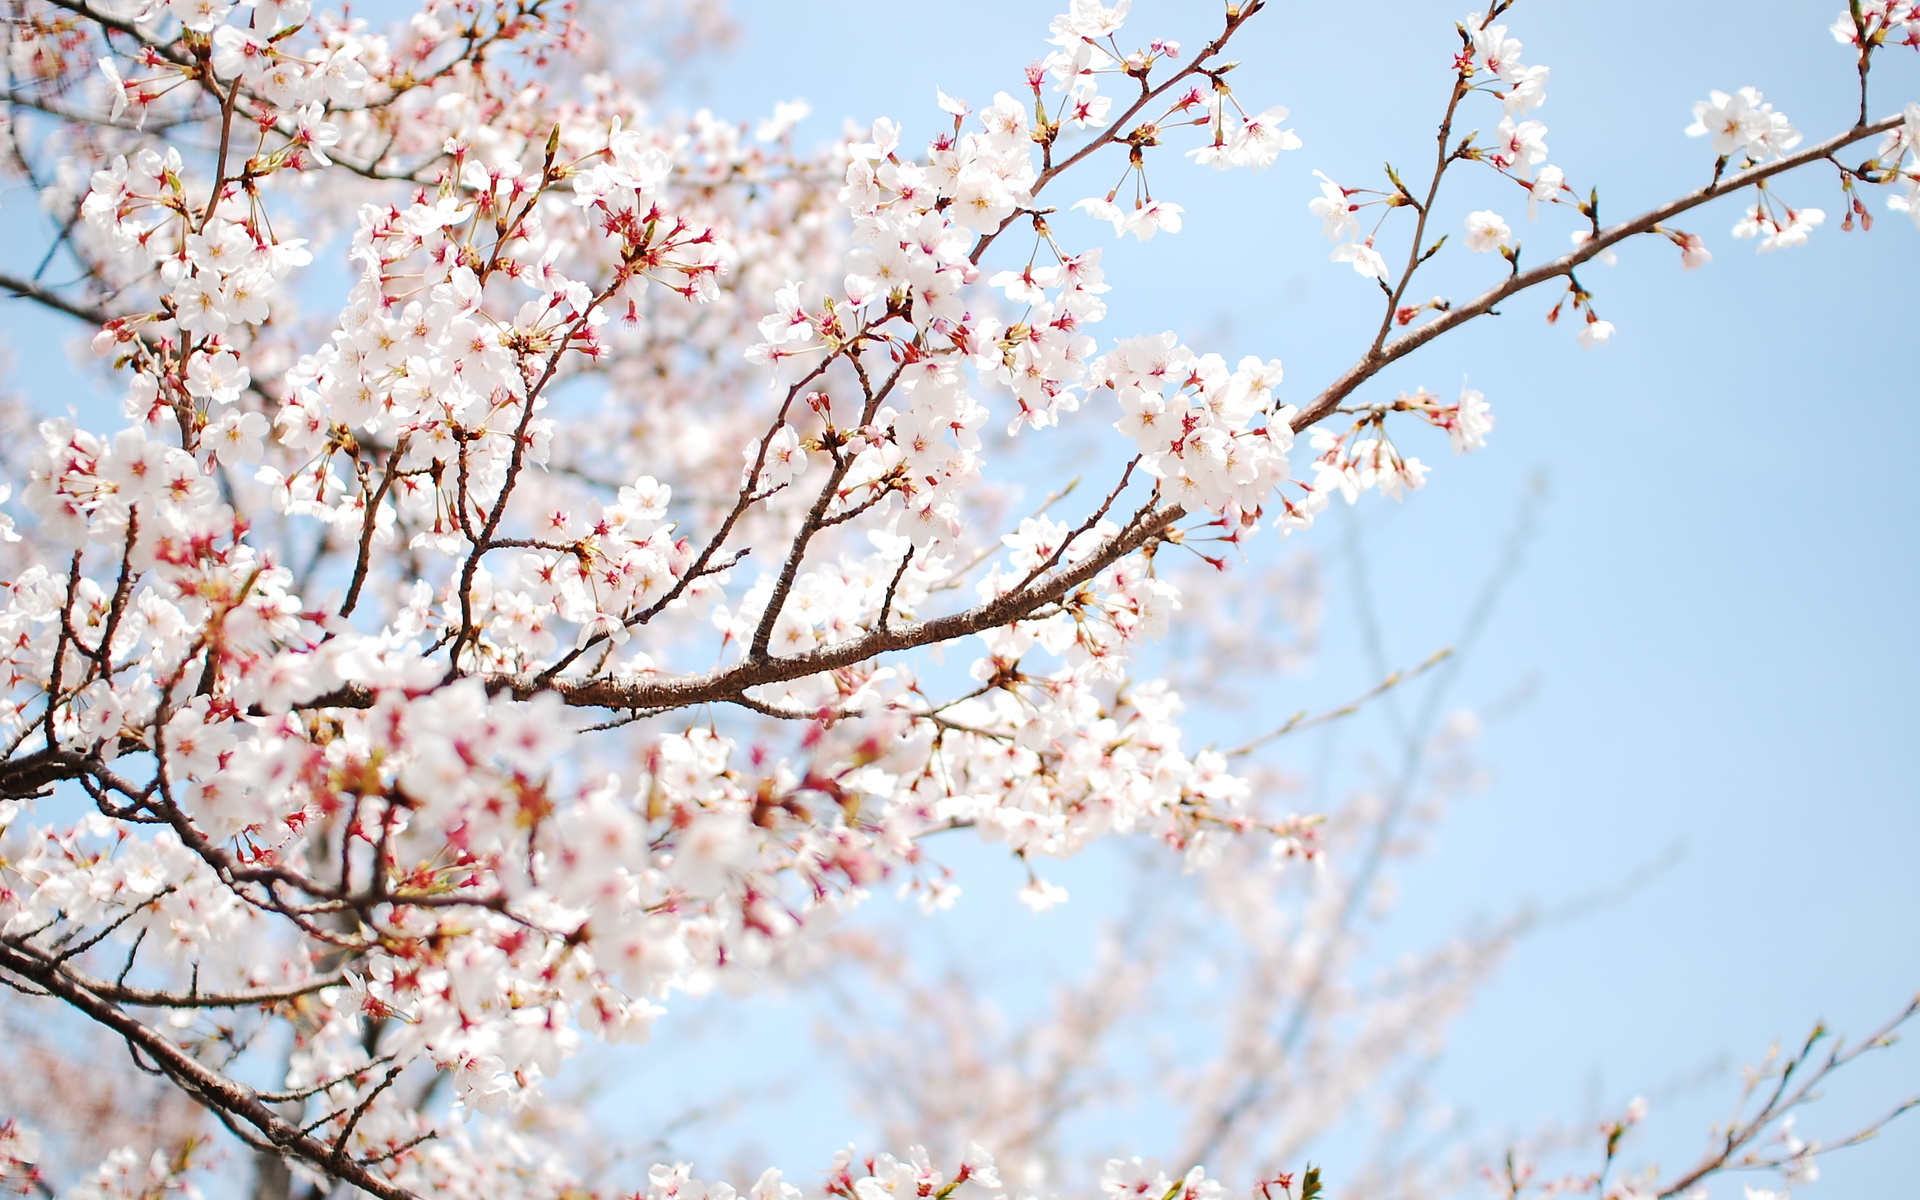 Cherry blossom tree hd wallpaper background hd wallpapers | Chainimage